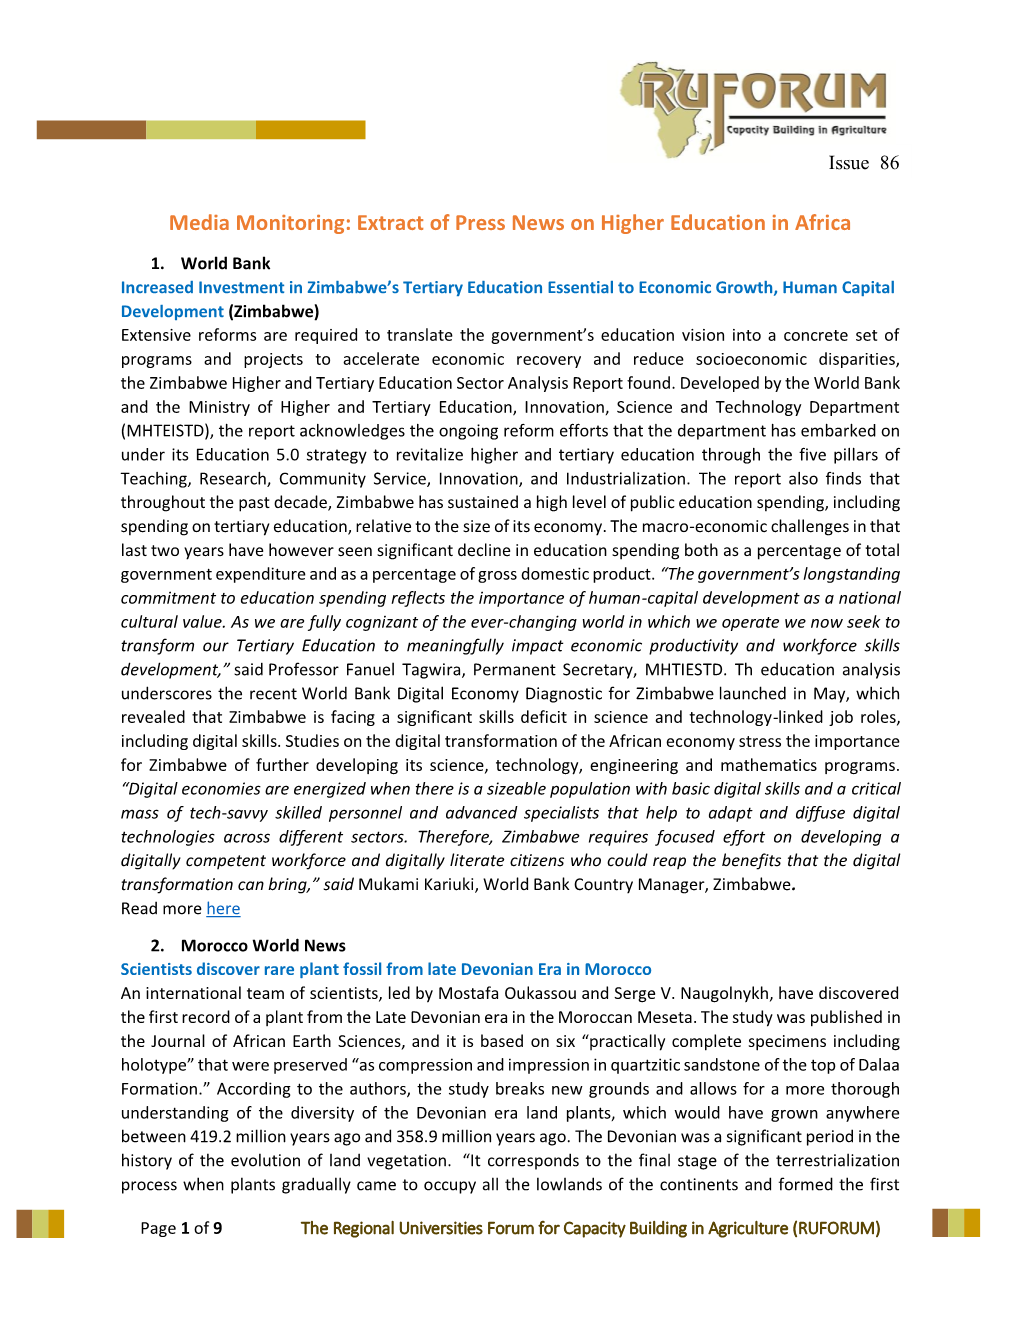 Media Monitoring: Extract of Press News on Higher Education in Africa